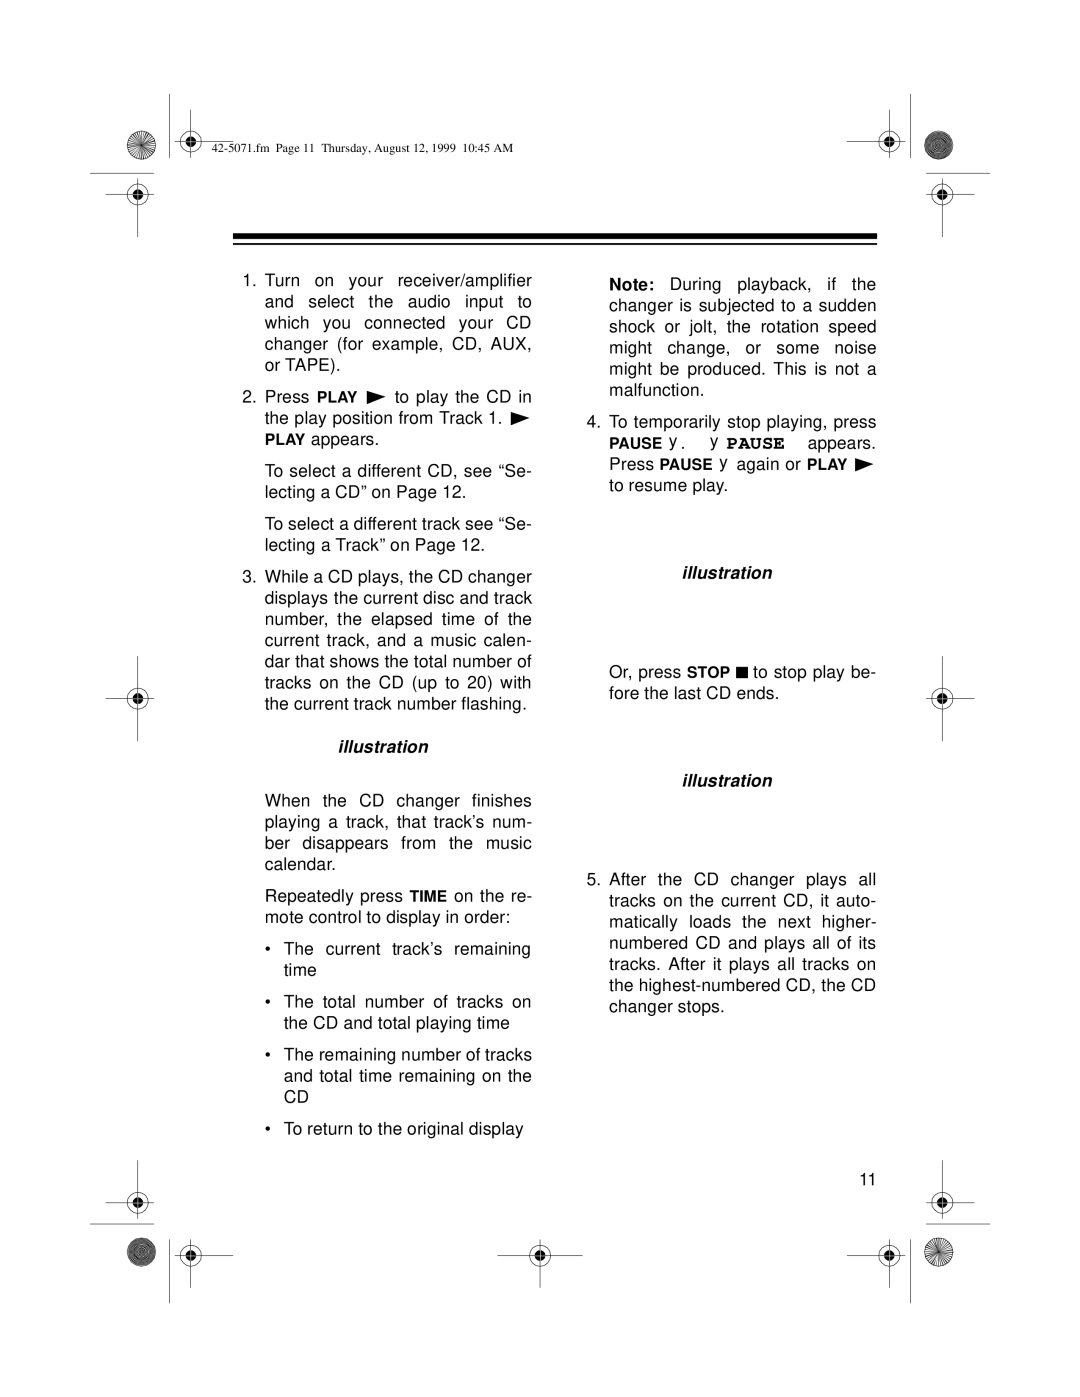 Radio Shack CD-8150 owner manual illustration, The current track’s remaining time 